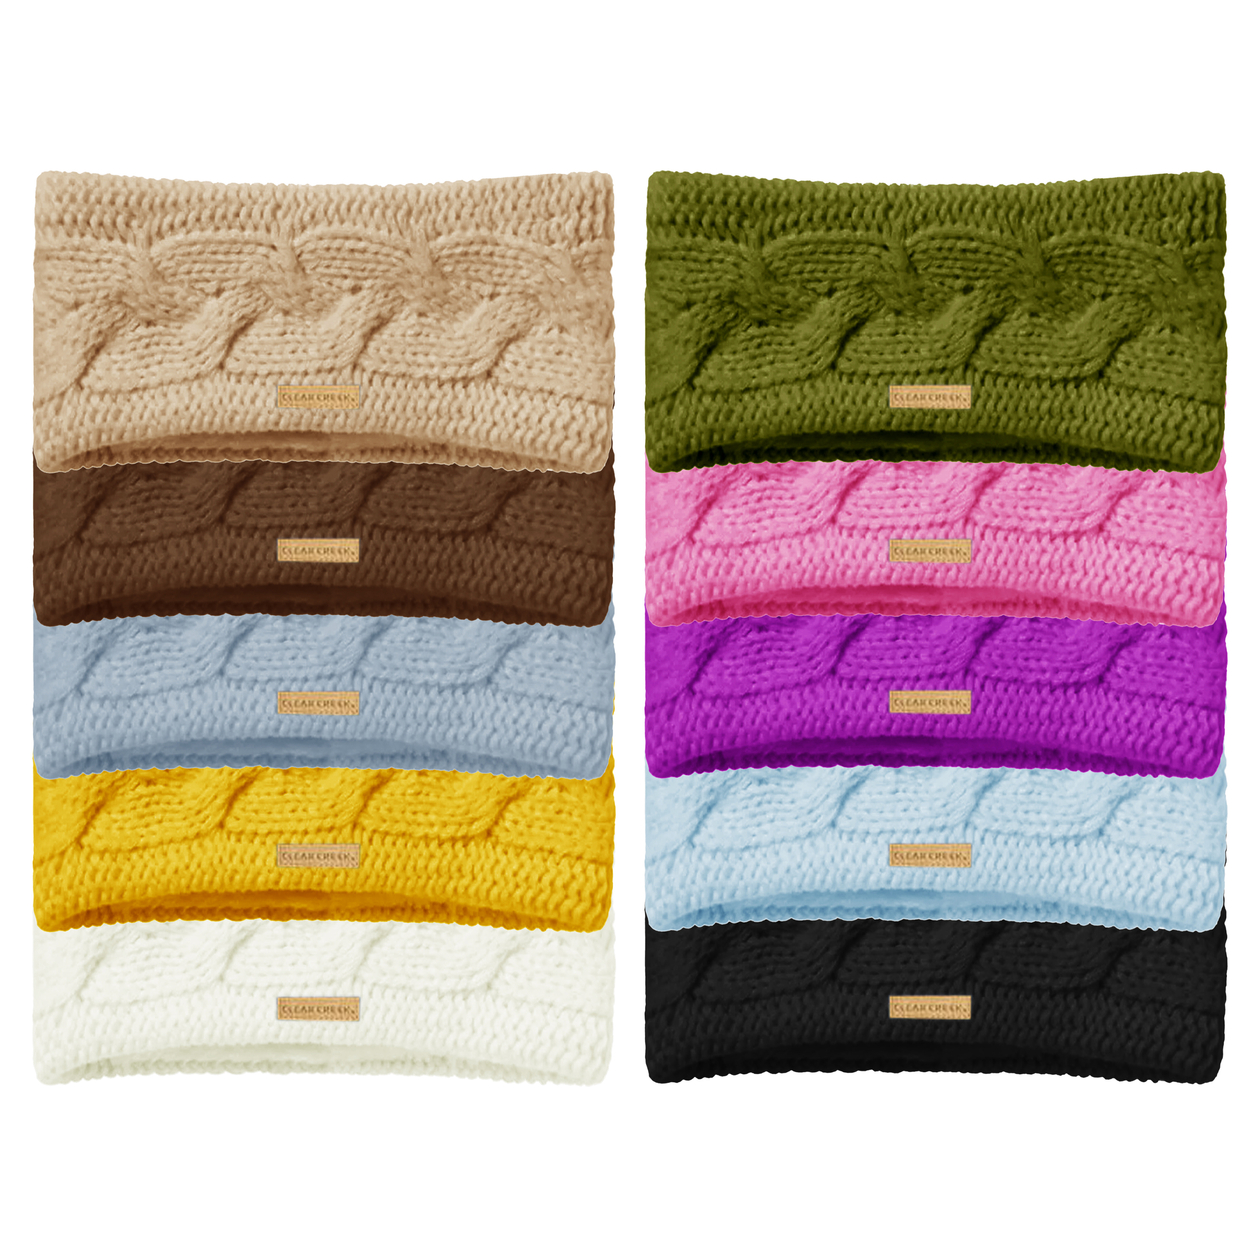 2-Pack: Womens Ultra-Soft Cozy Polar Fleece Lined Cable Knit Popcorn Stitch Headband - Assorted